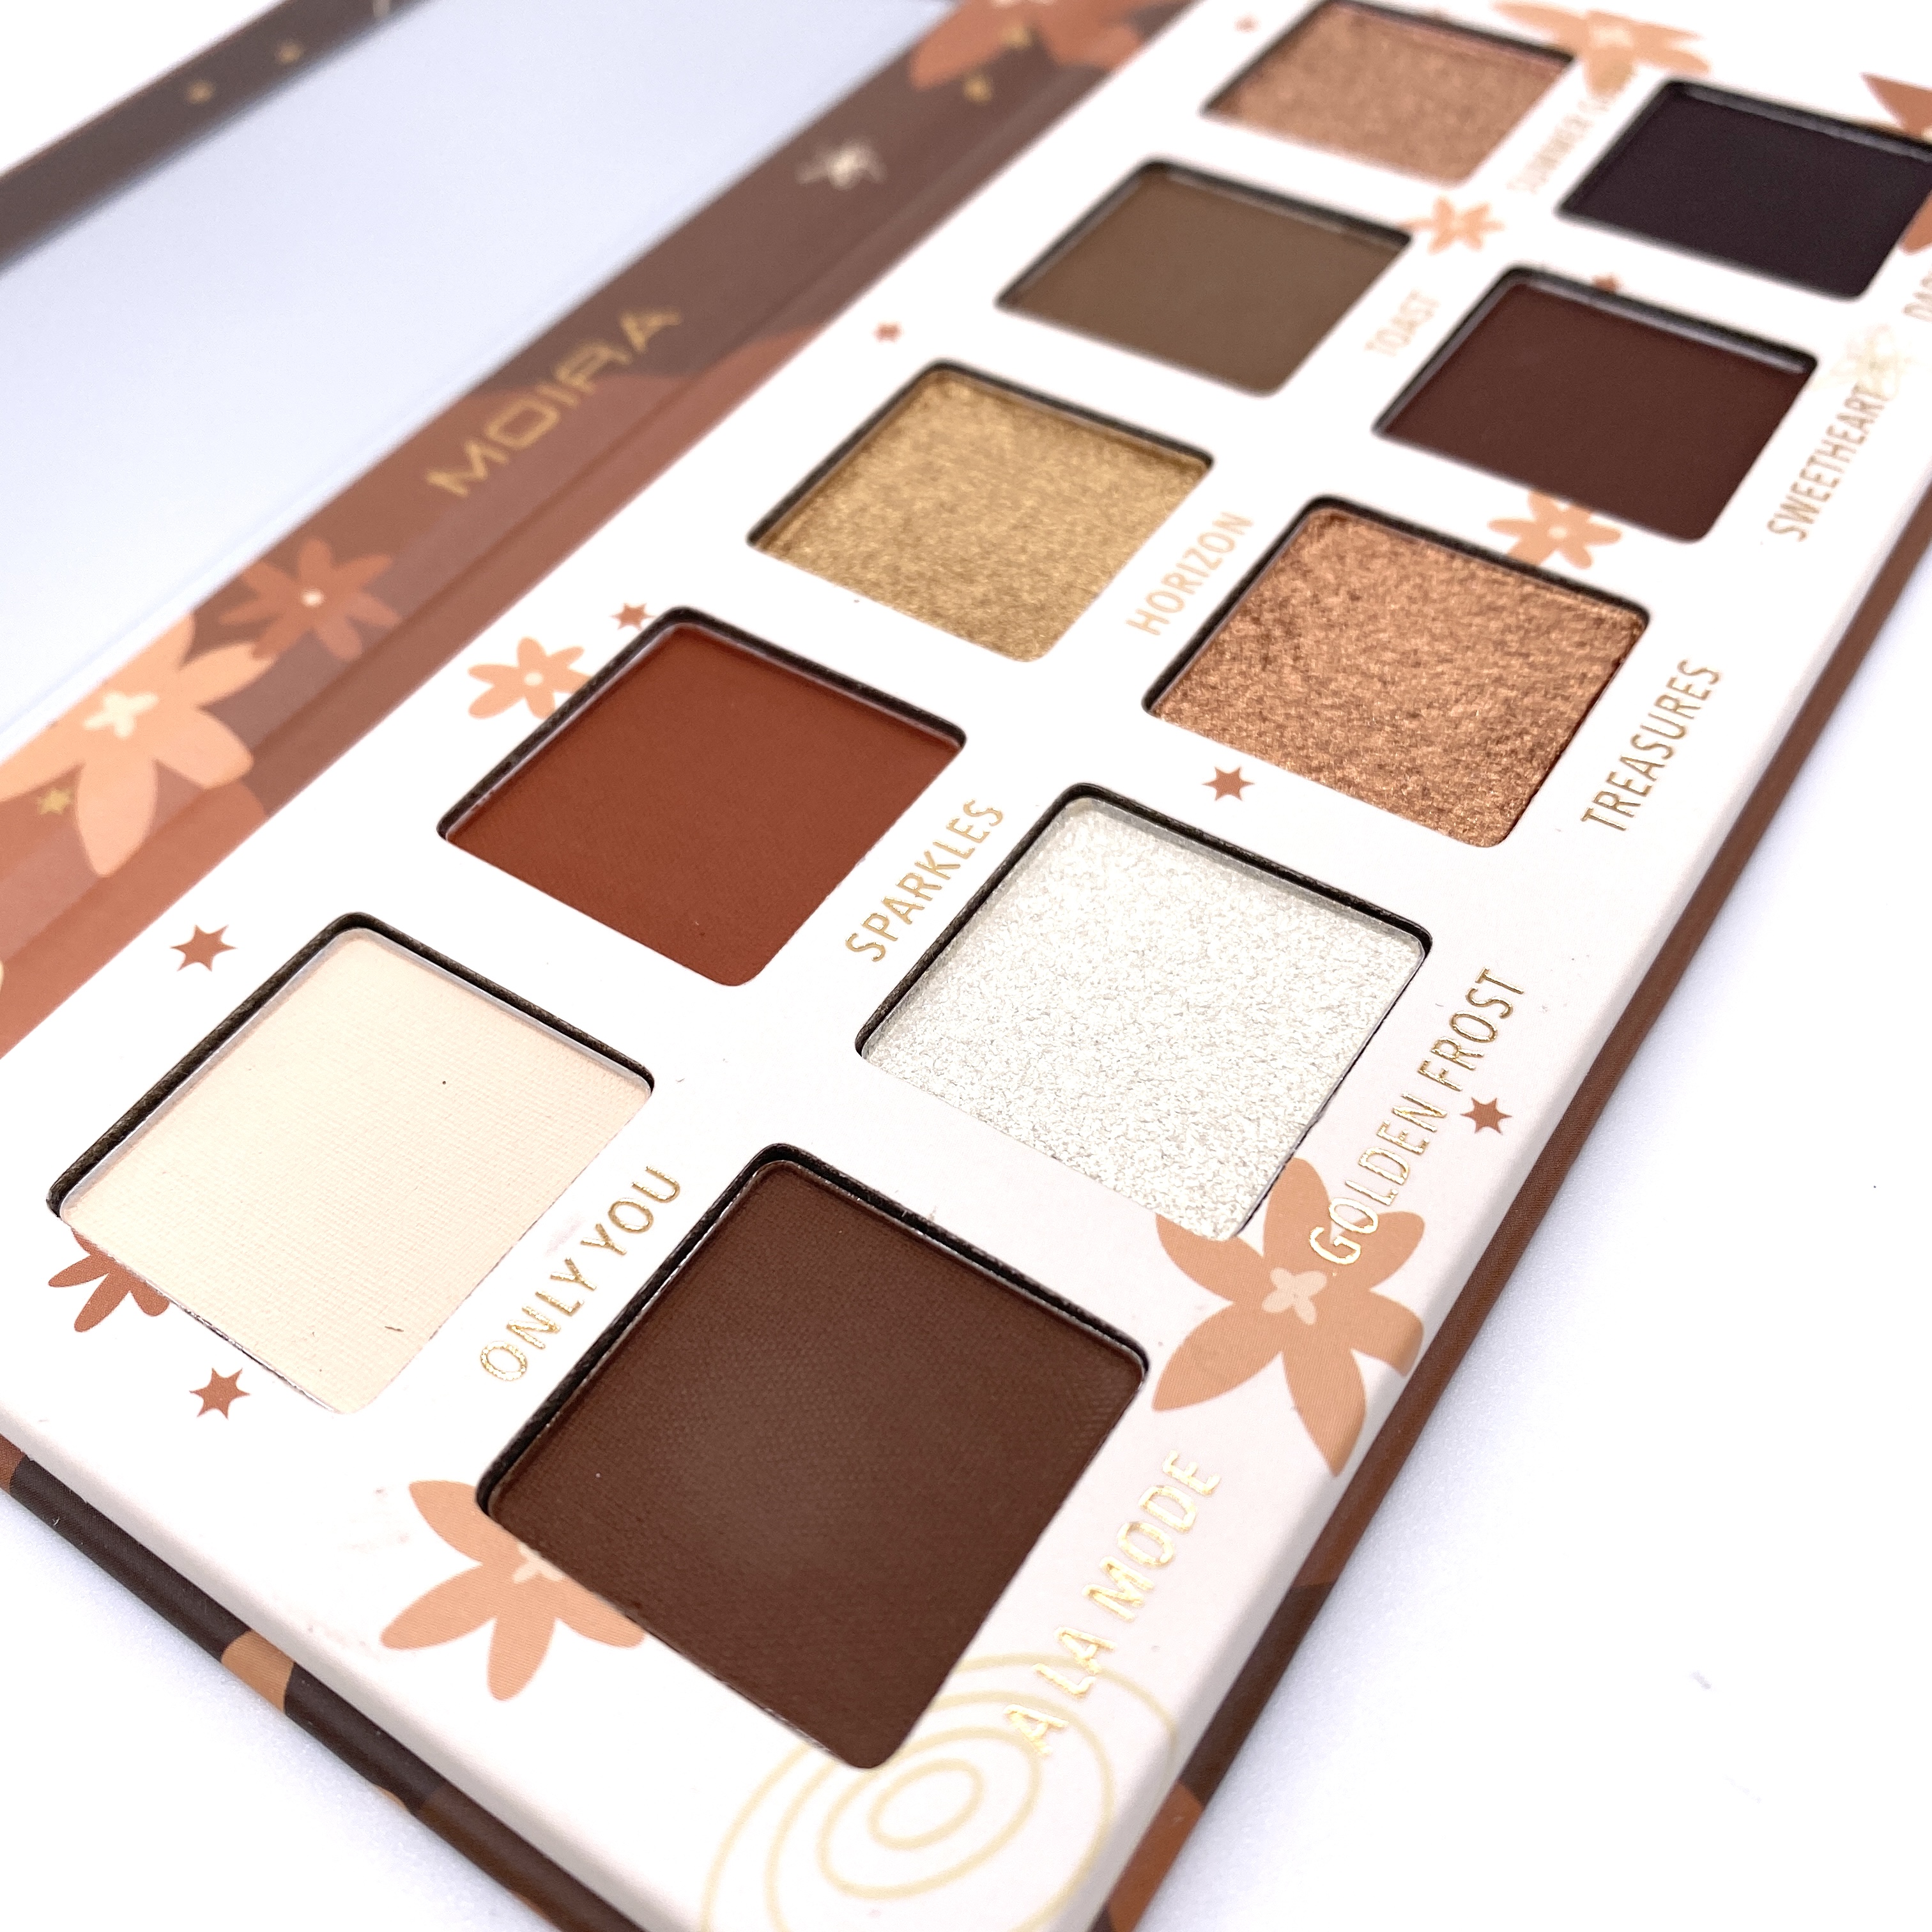 Moira Cosmetics Fairytale Shadow Palette Close-Up for The Beem Box January 2021